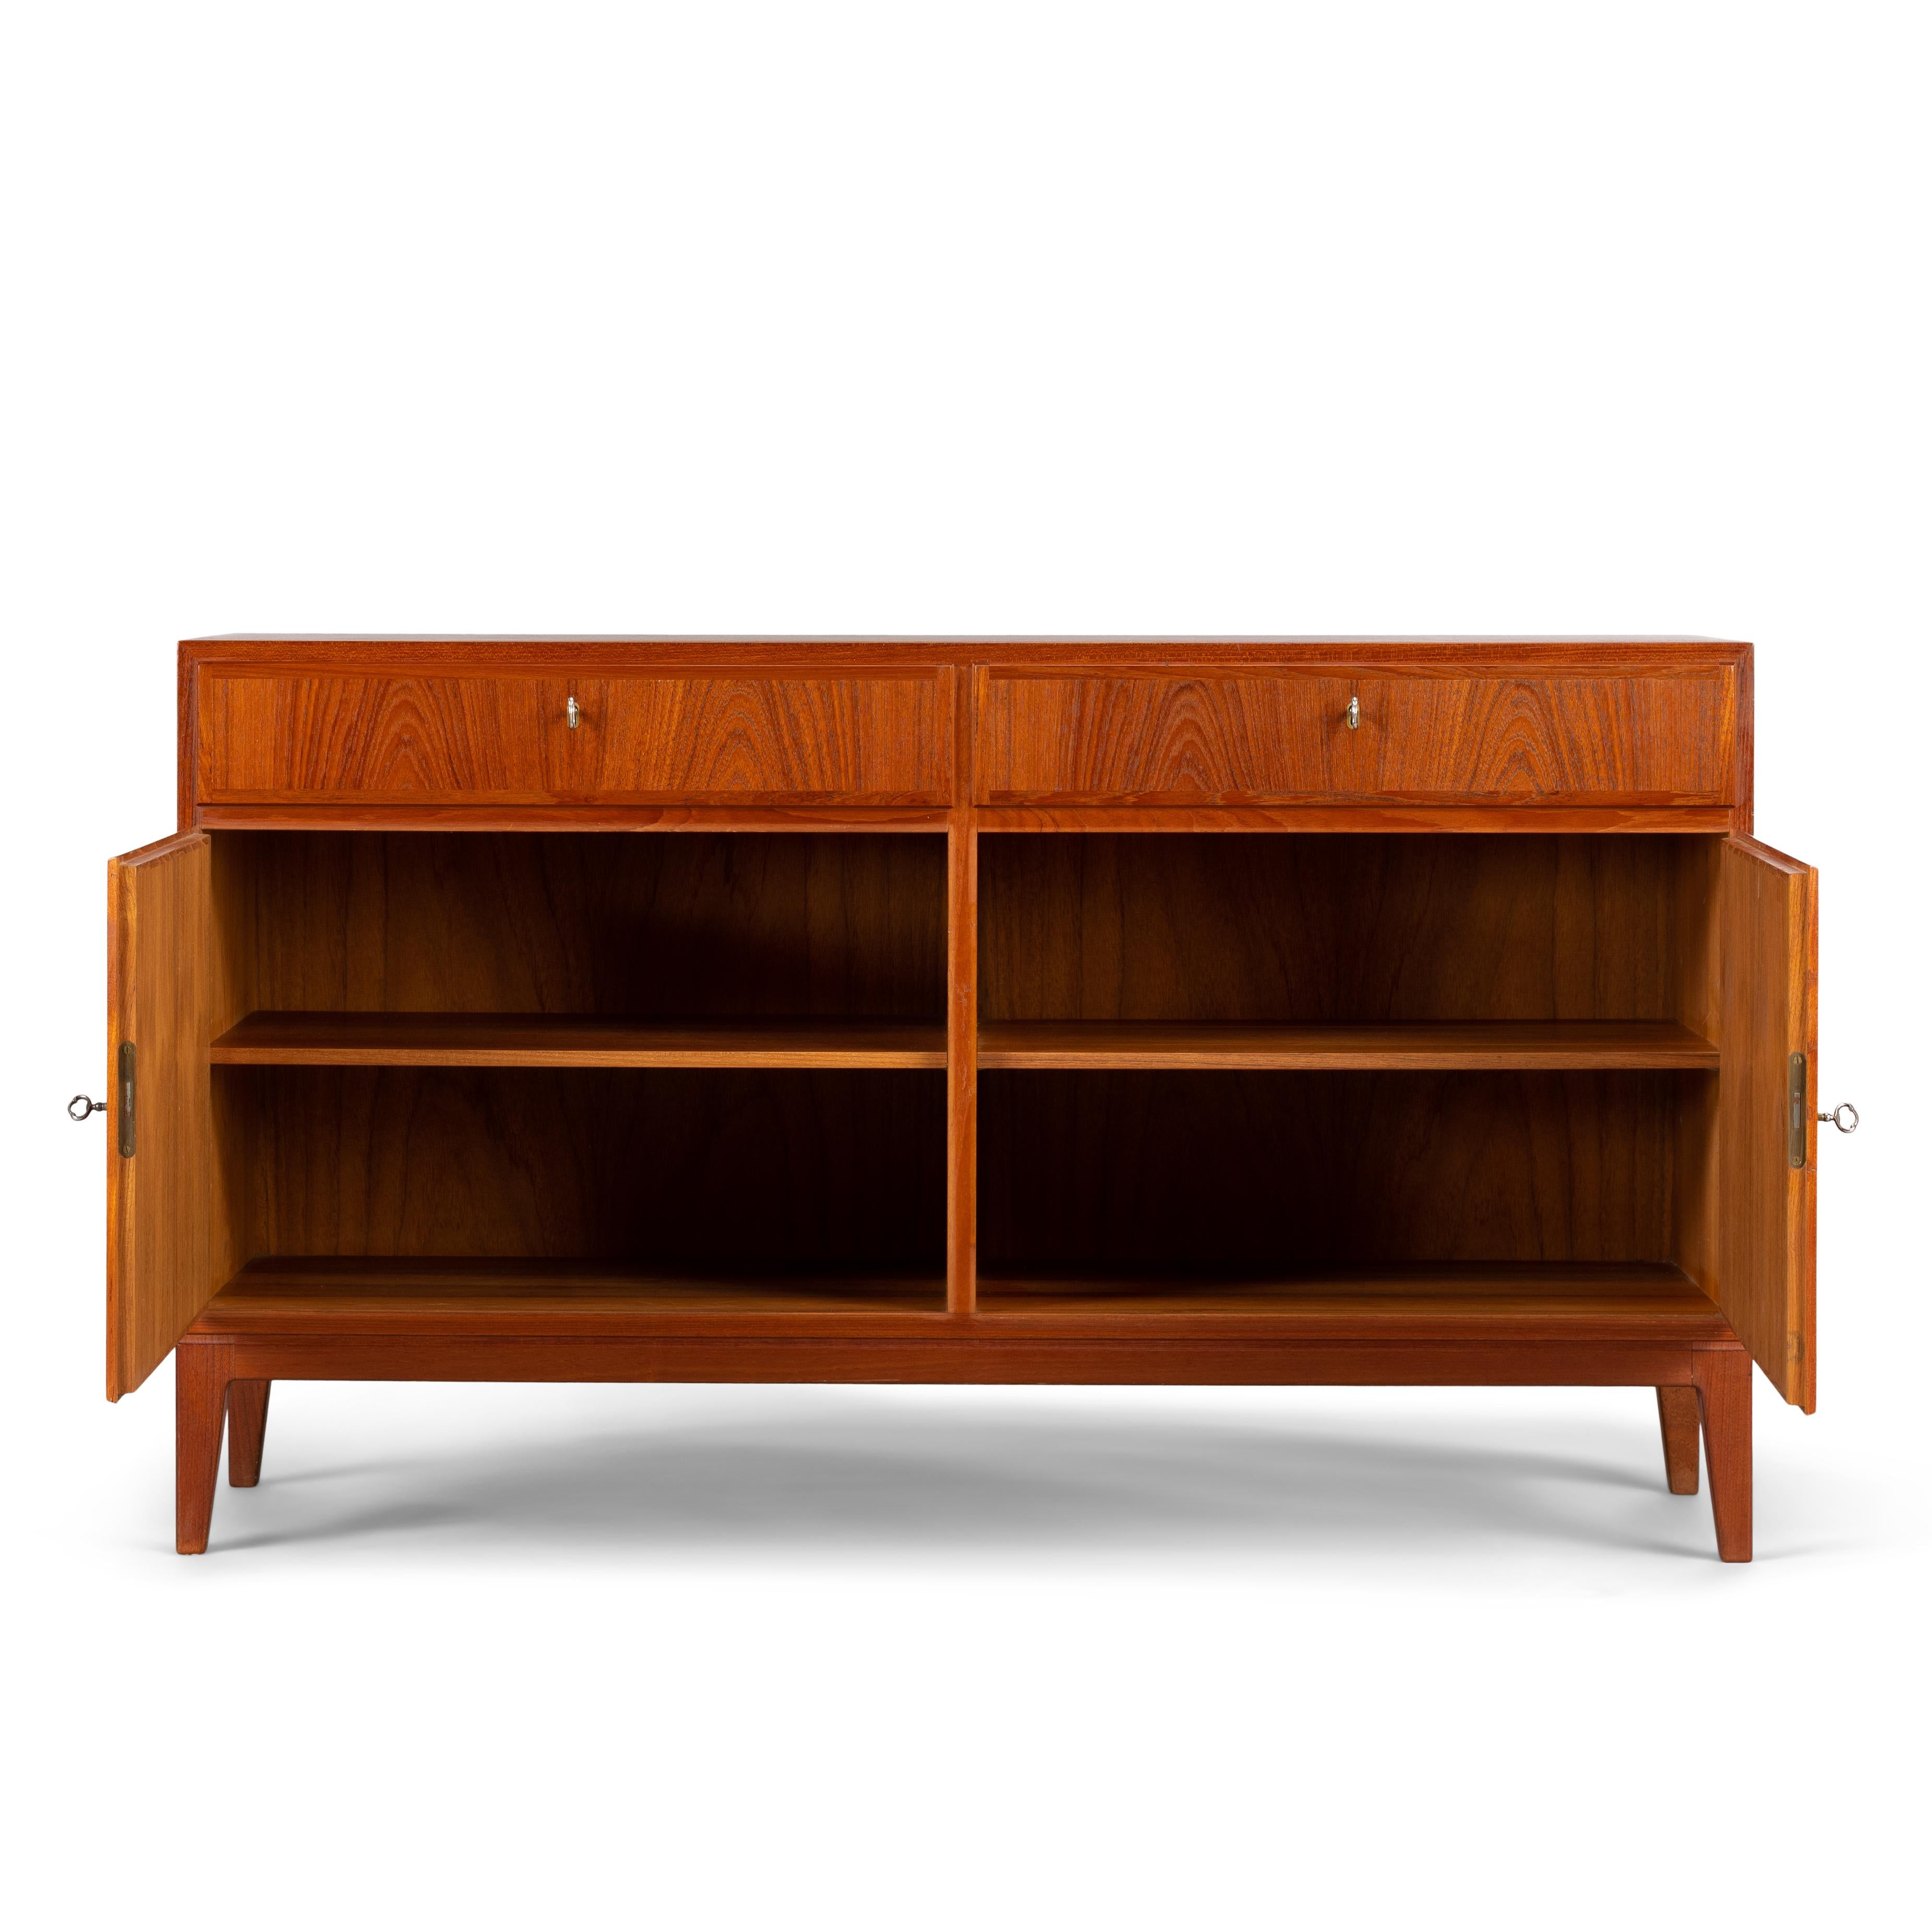 A stylish credenza, this teak model no. 5 chest by Gunni Omann for the Oman Jun. Møbelfabrik. Superb level of quality and use of high end materials on top of its design make it a full pull. Behind the two doors is an in height adjustable shelve. The